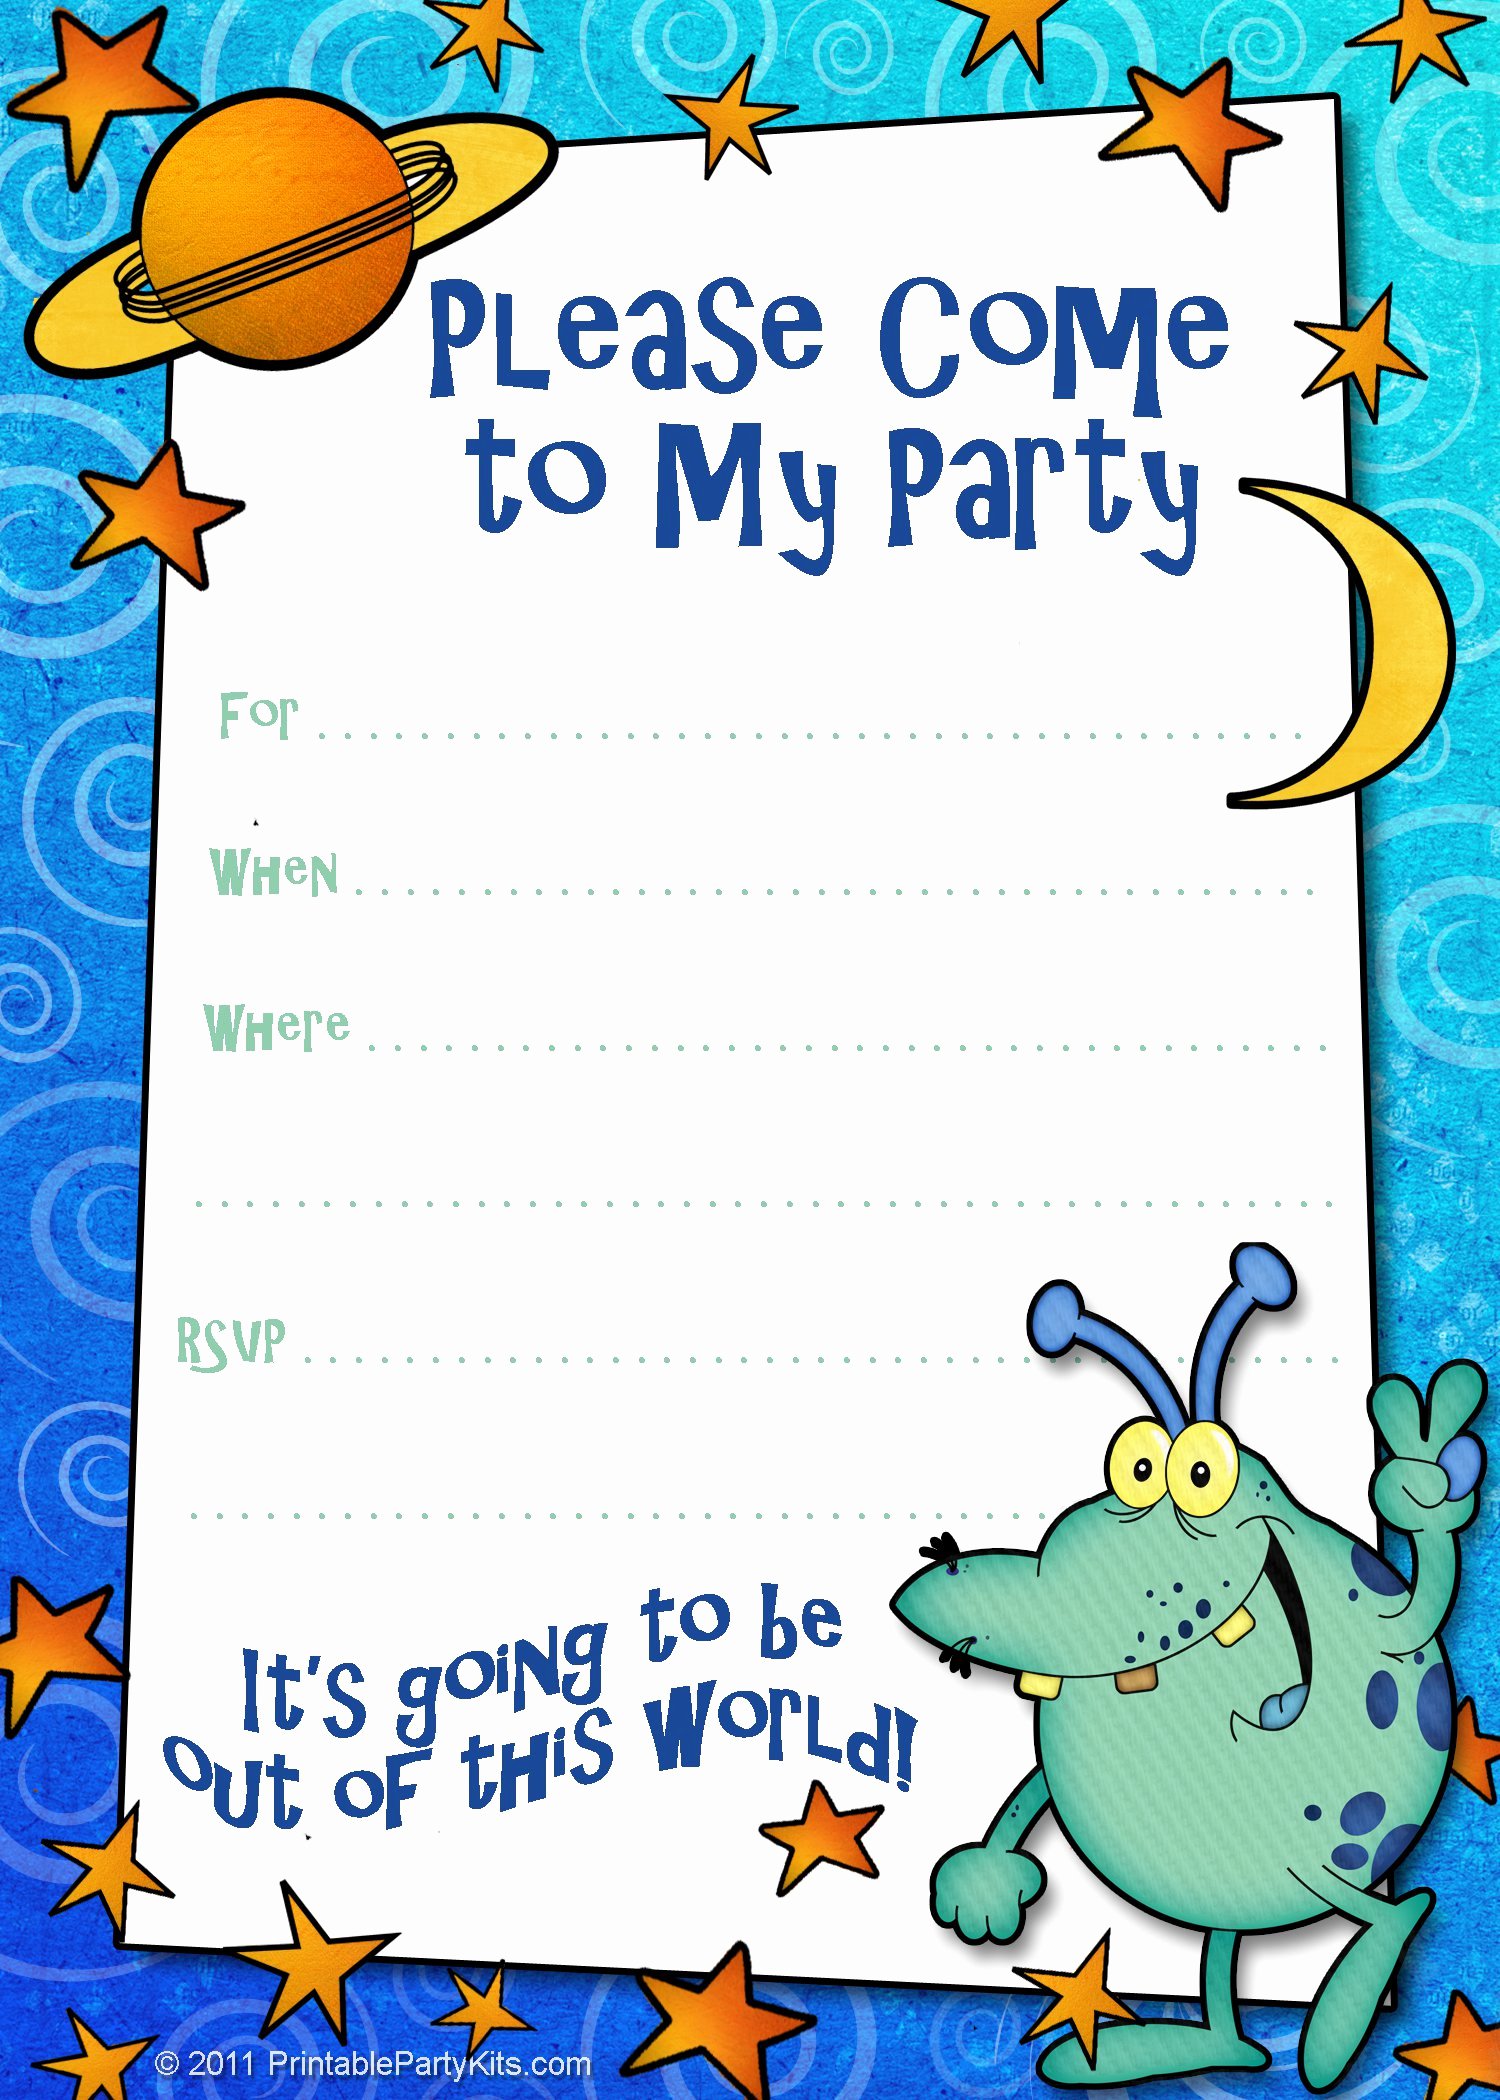 Party Invitation Template Printable Beautiful Free Printable Childrens Party Invitations